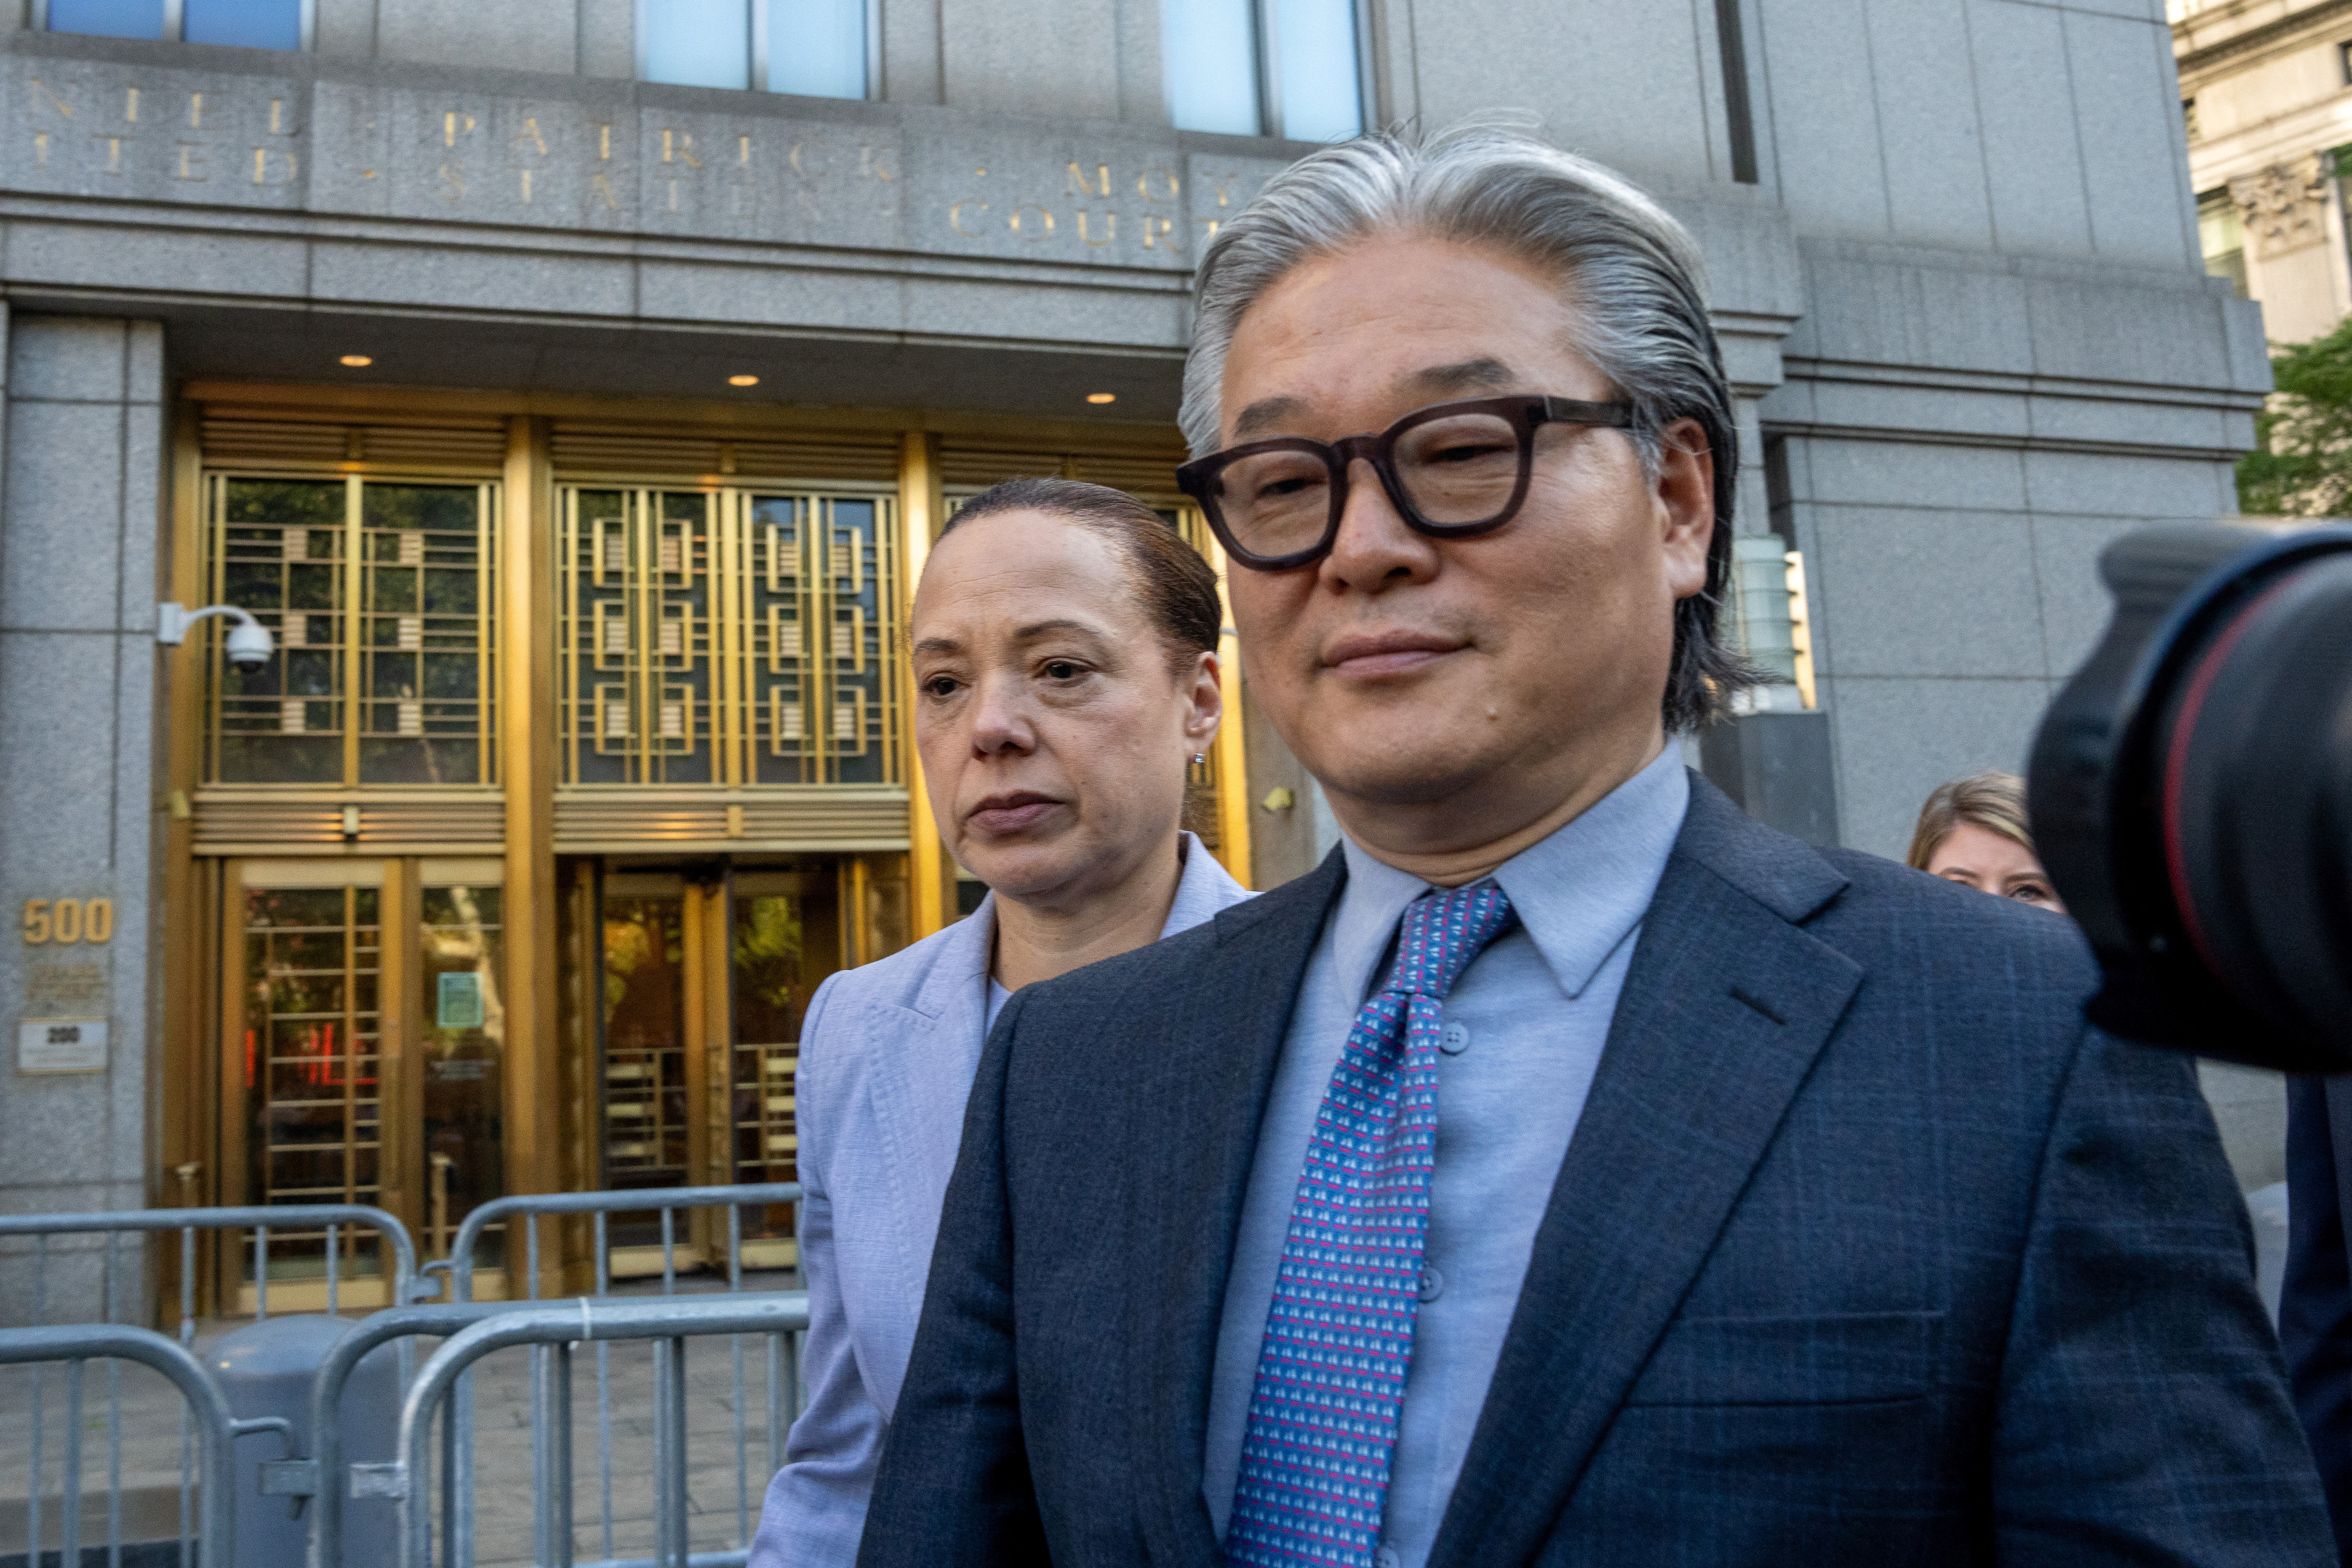 Sung Kook ‘Bill’ Huang the founder and head of private investment firm Archegos found guilty